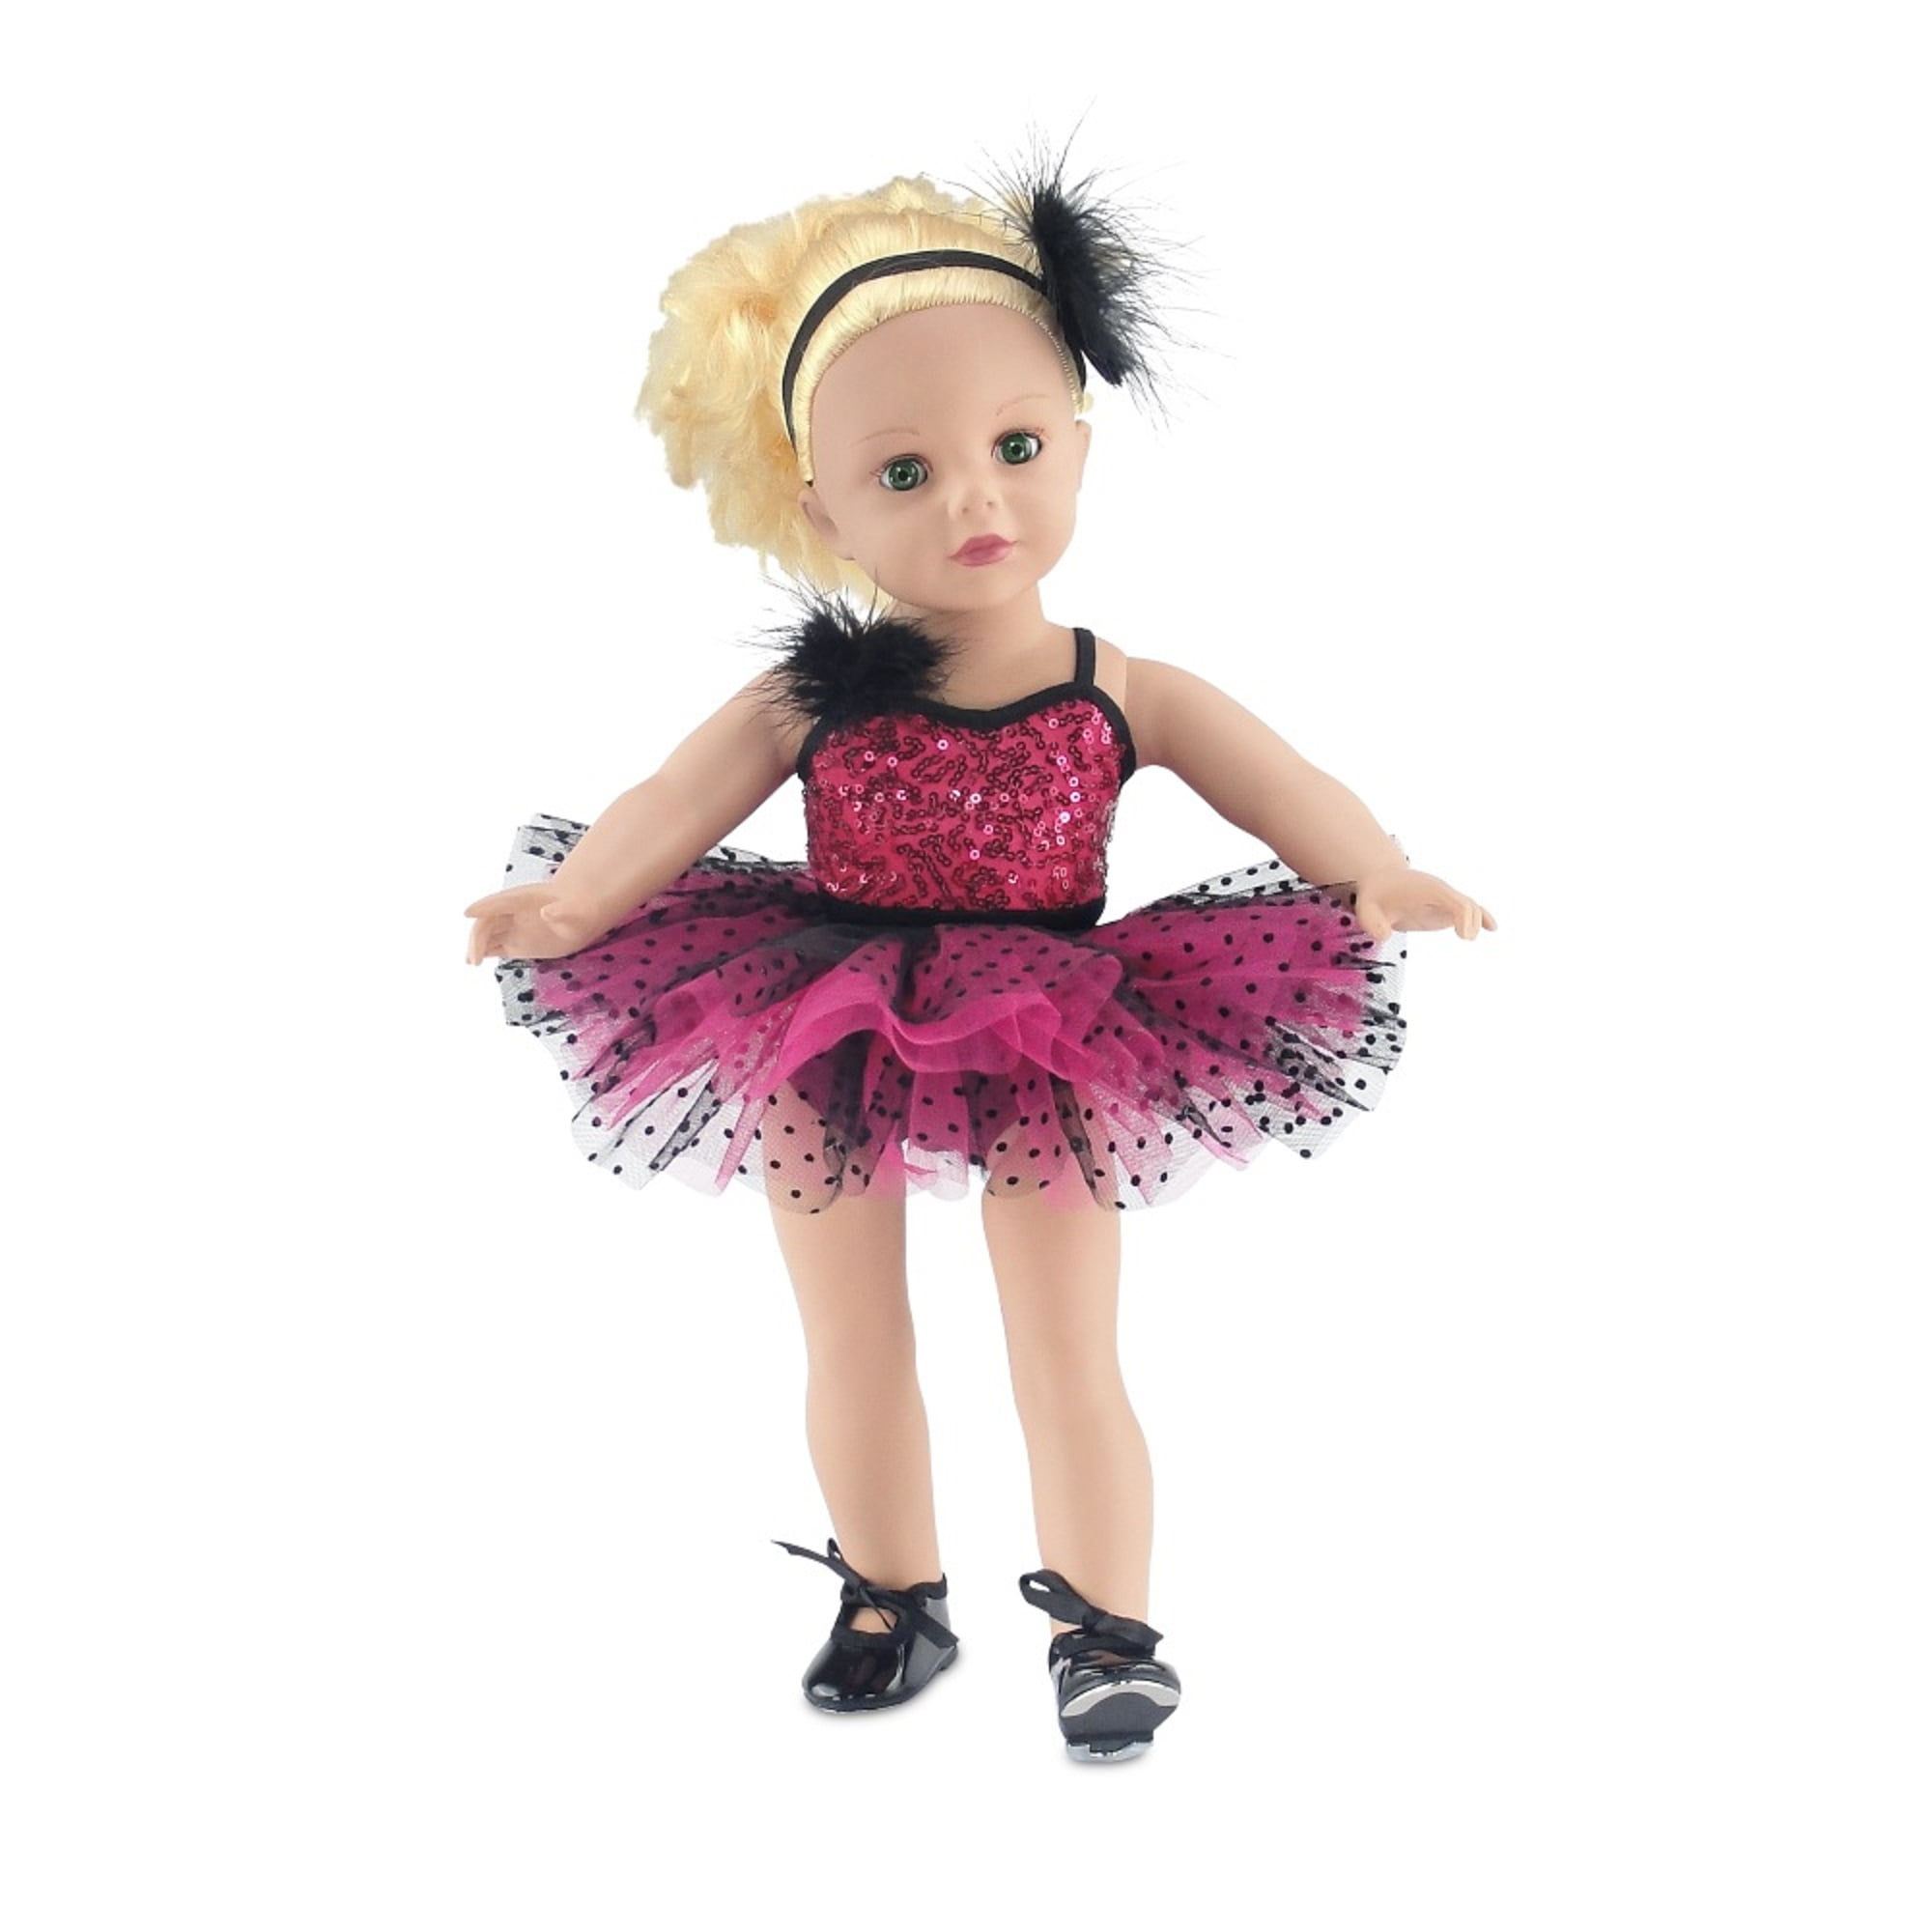 Emily Rose 18 Inch Doll Clothes Clothing Doll Jazz Ballet Ballerina 4 Piece  Outfit Gift Set Girl Toy Accessories, Includes Doll Tap Shoes Accessory |  GIFT BOXED! | Fits My Life As Dolls 